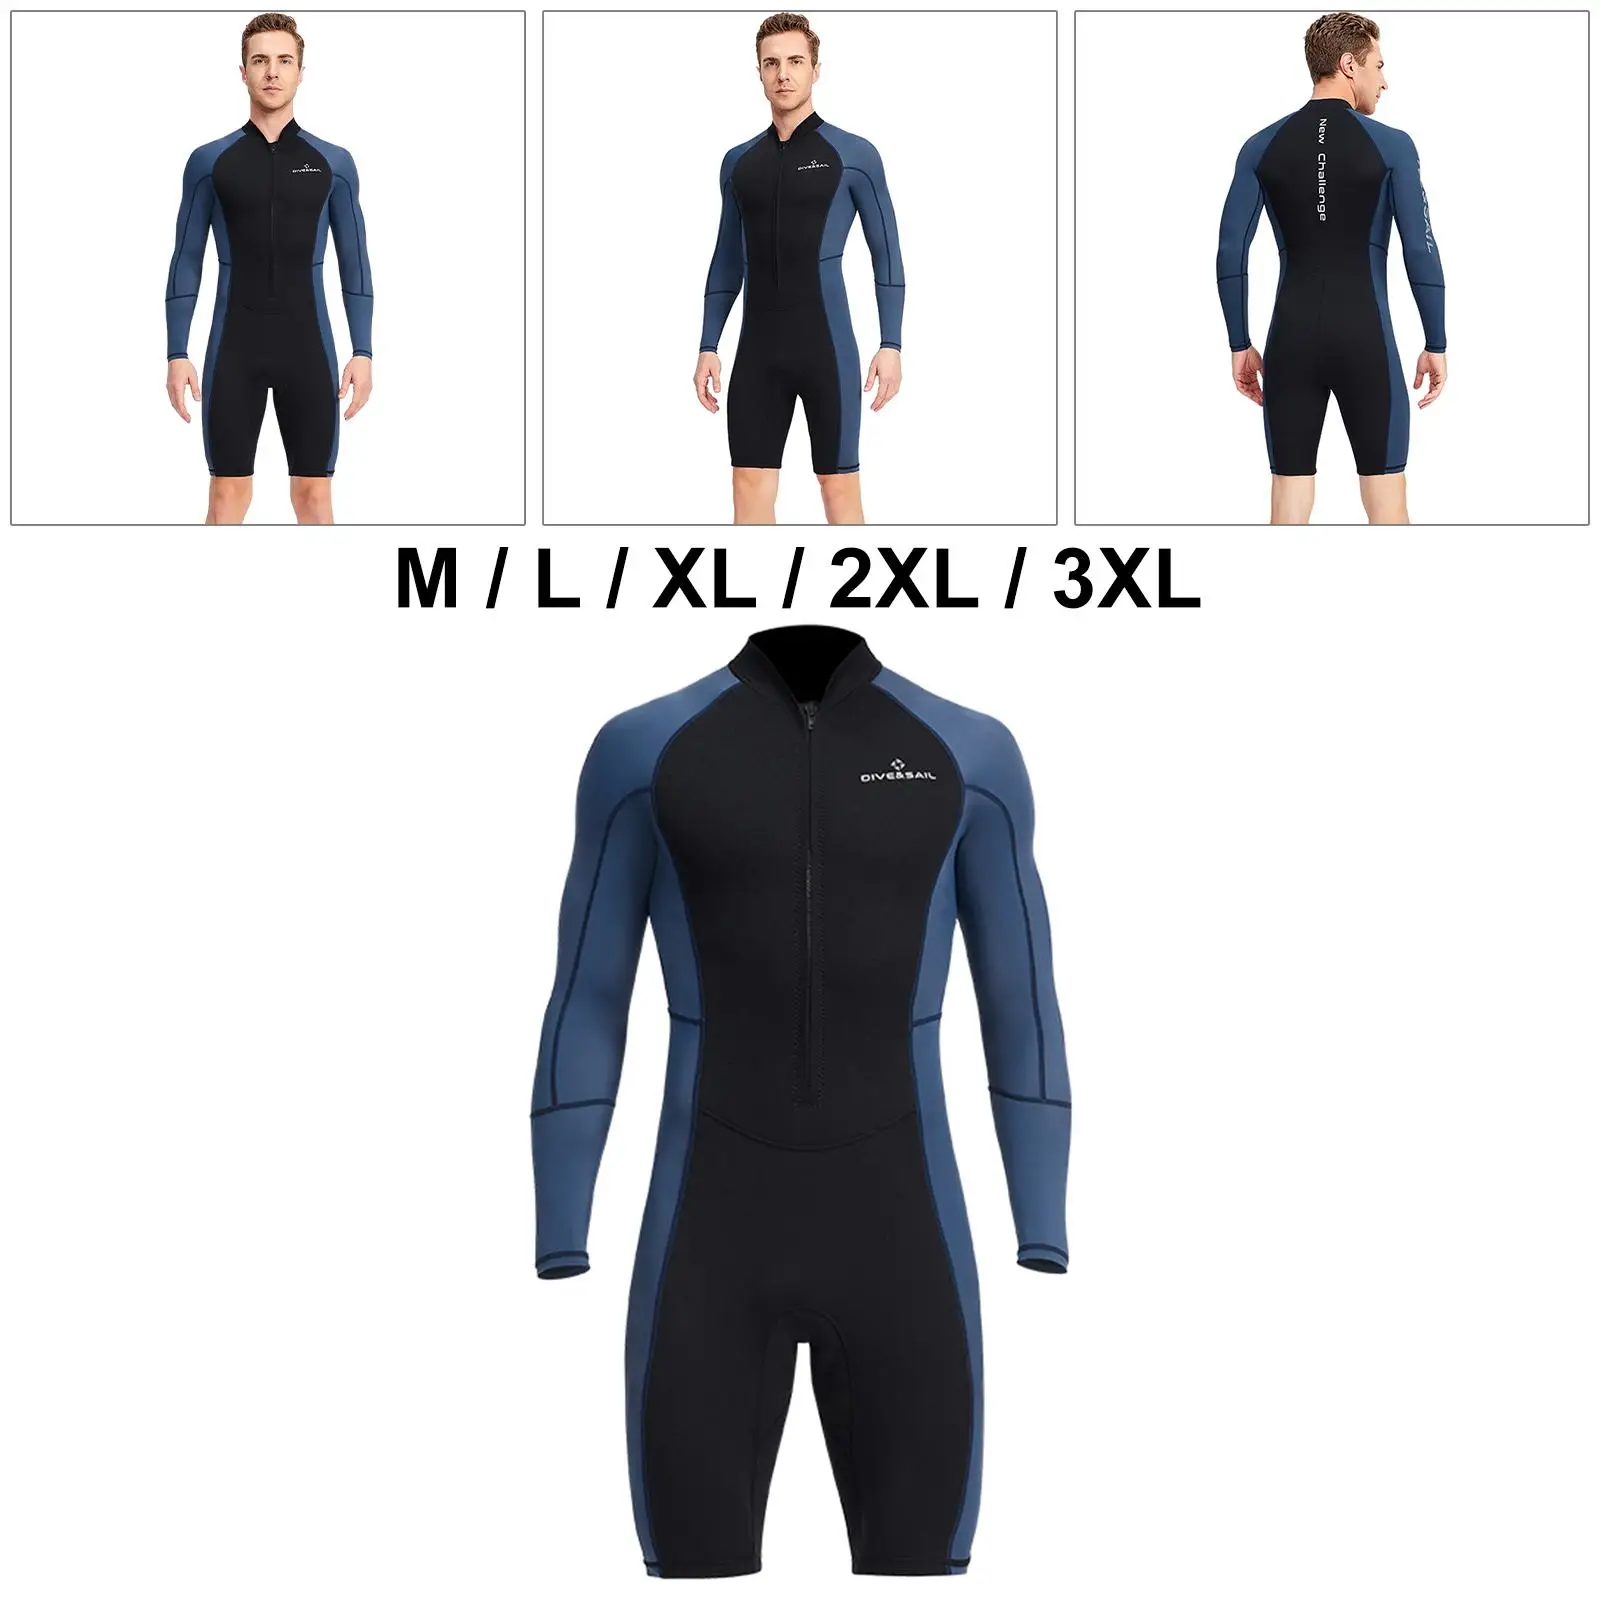 1.5mm Neoprene Men Wetsuit Diving Suit Shorts Keep Warm UV Protection Wet Suit for Kayaking Water Sports Surfing Diving Swimming